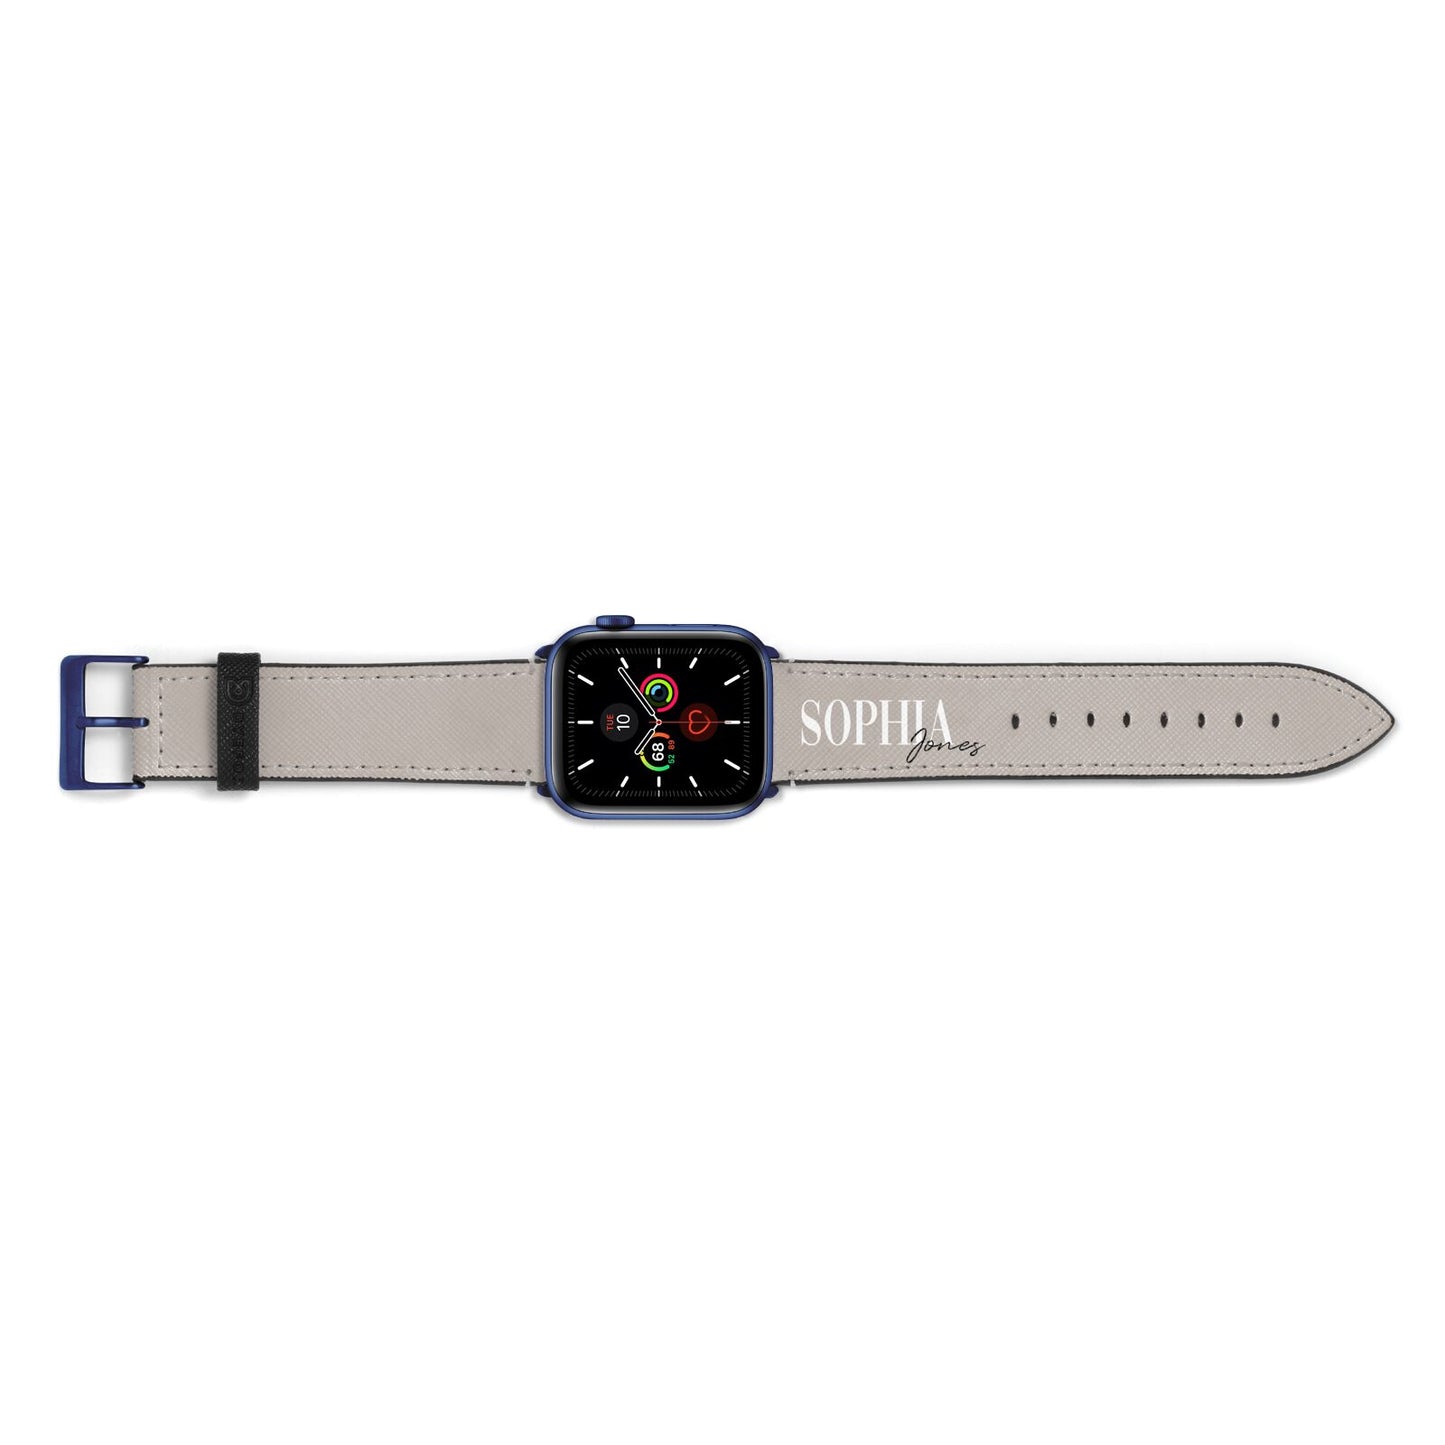 Stone Colour with Personalised Name Apple Watch Strap Landscape Image Blue Hardware